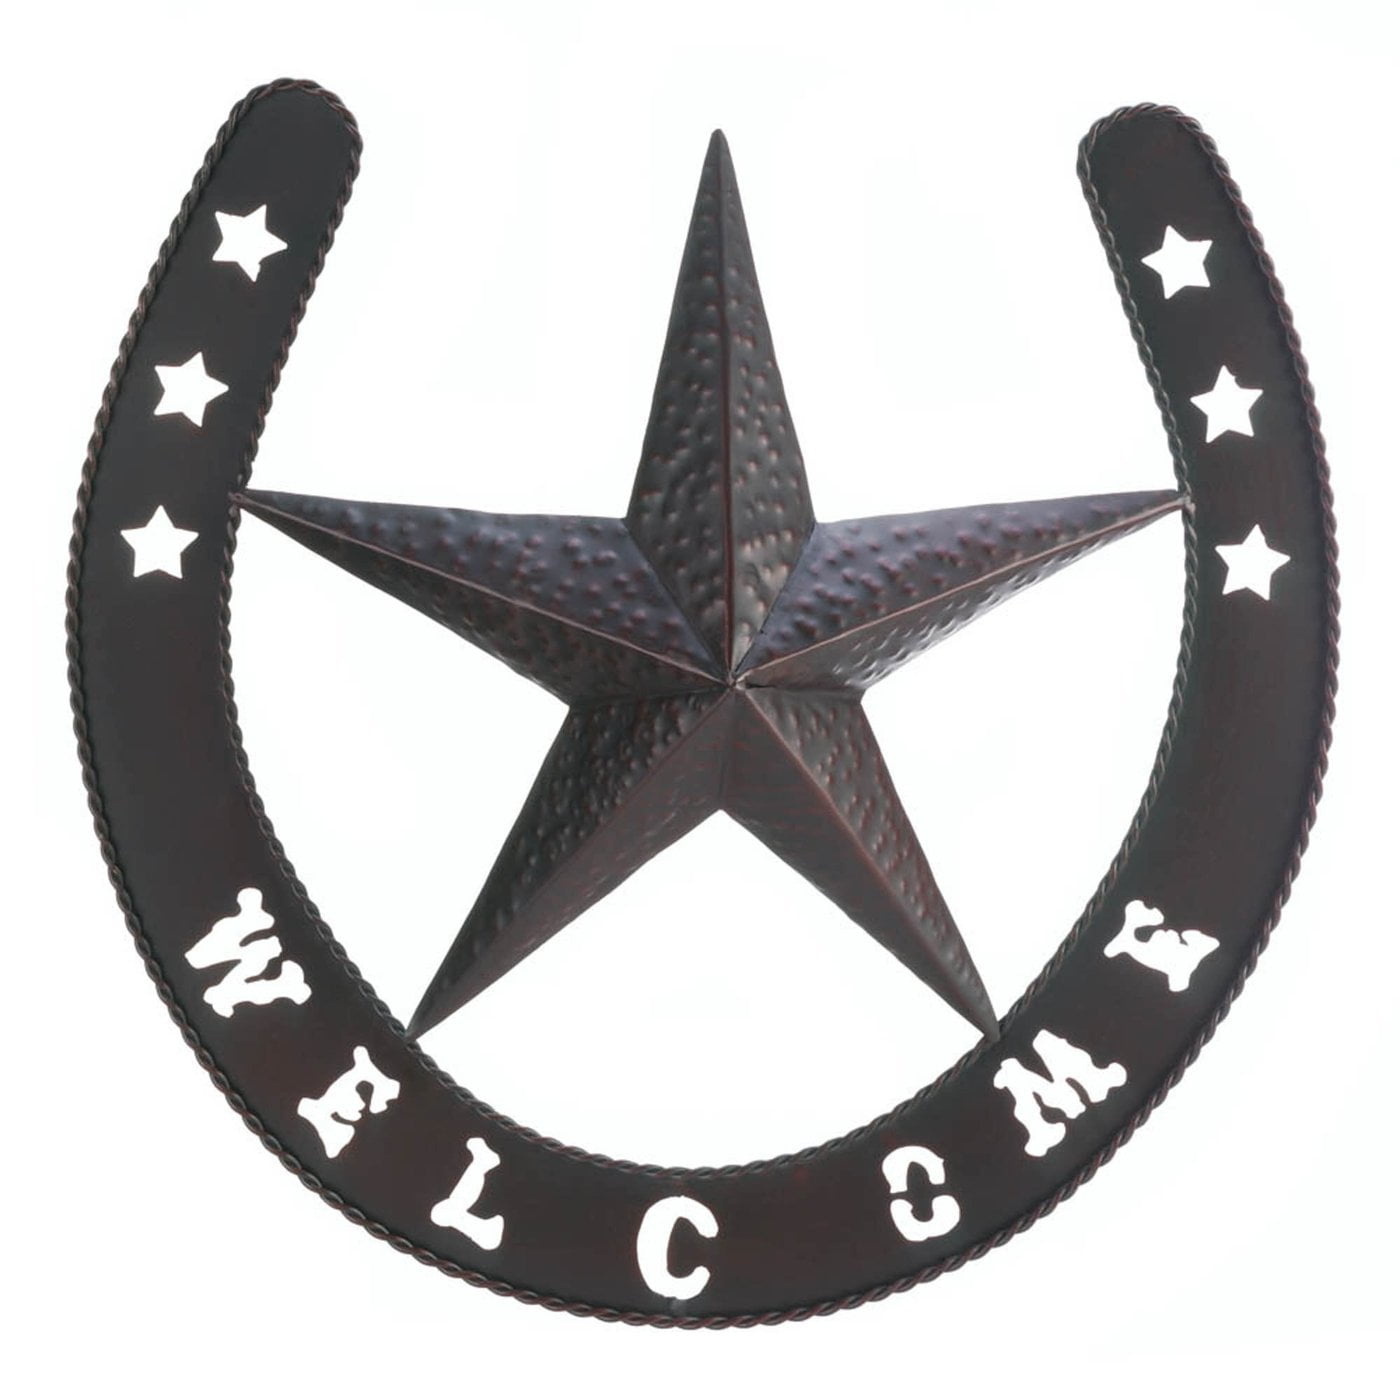 Cast Iron HORSESHOE STAR WELCOME Cowboy Plaque Sign Rustic Ranch Wall Decor 